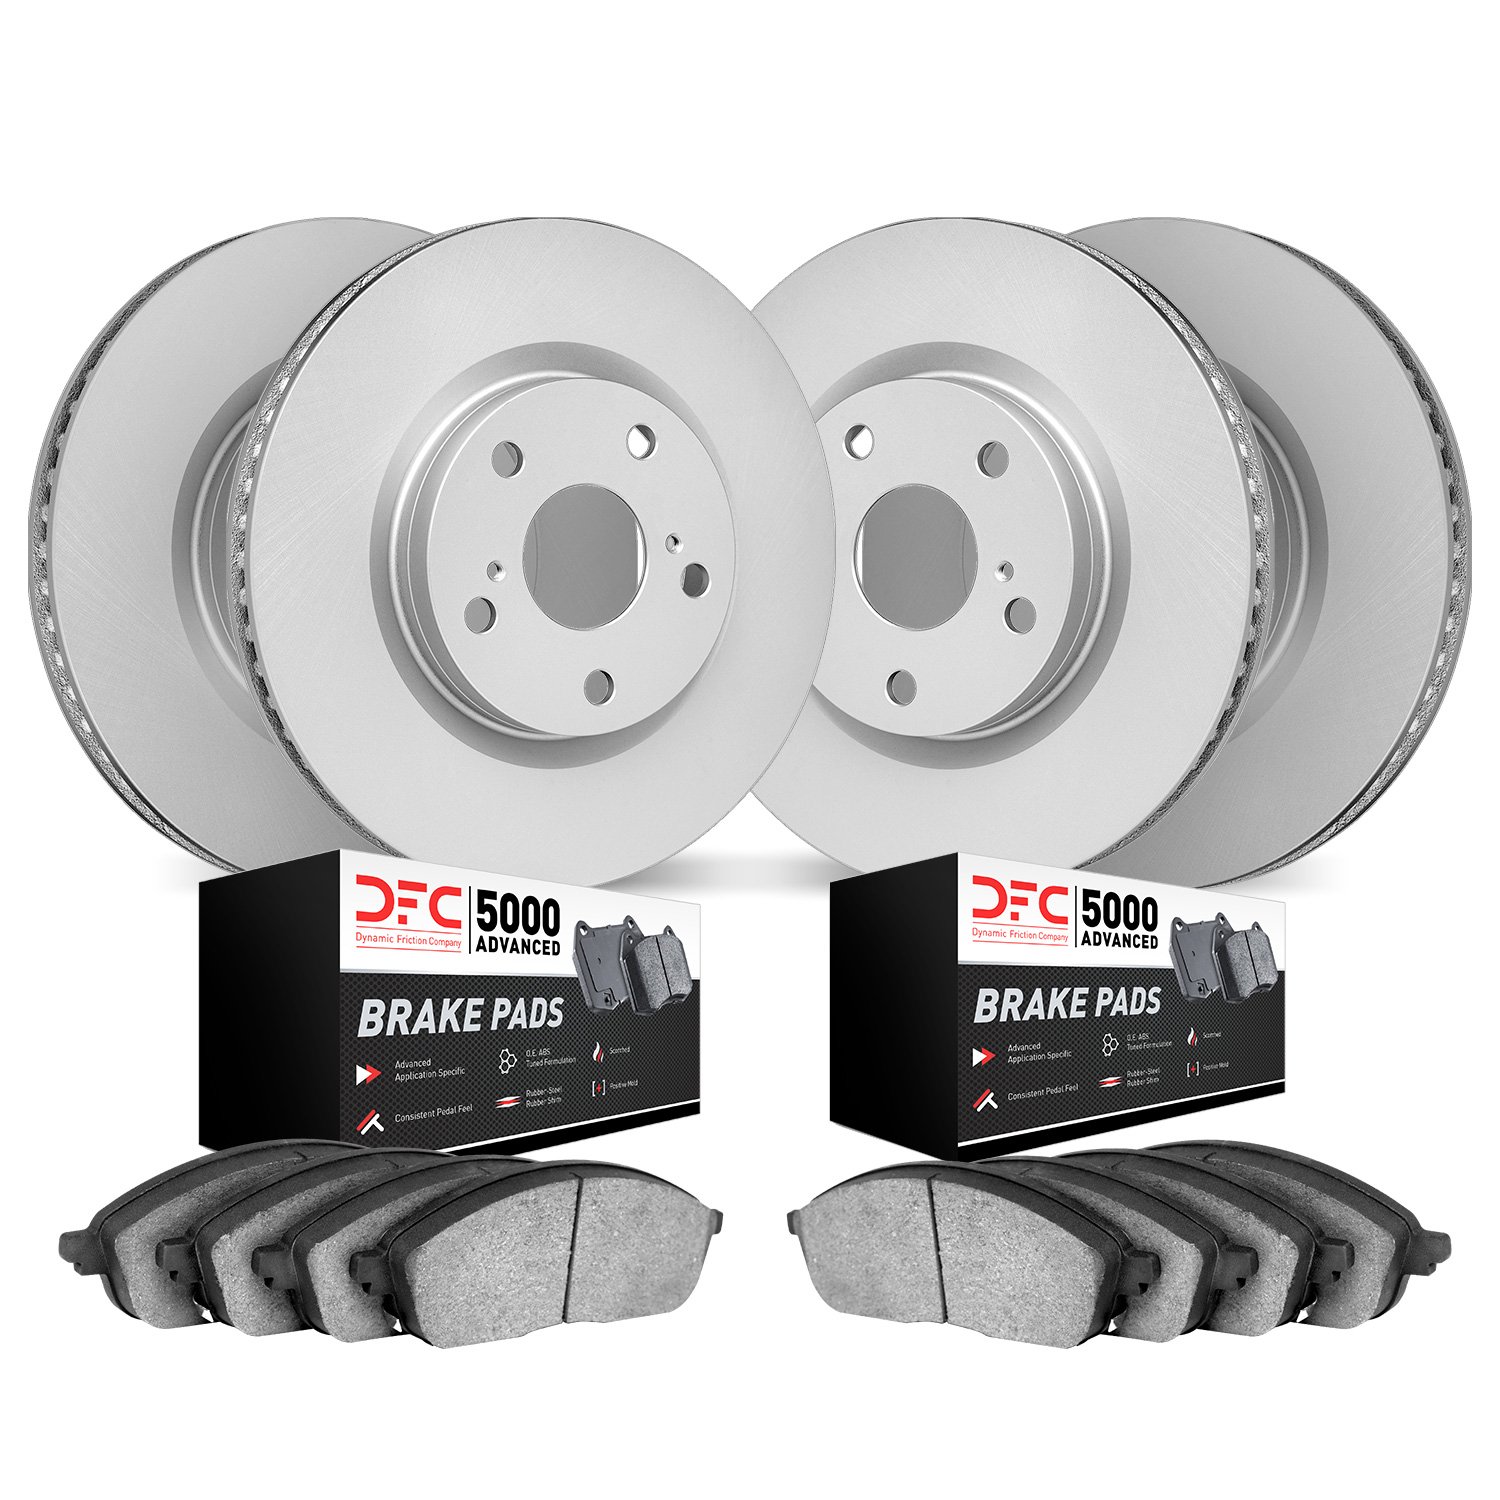 4504-56004 Geospec Brake Rotors w/5000 Advanced Brake Pads Kit, 2003-2011 Ford/Lincoln/Mercury/Mazda, Position: Front and Rear